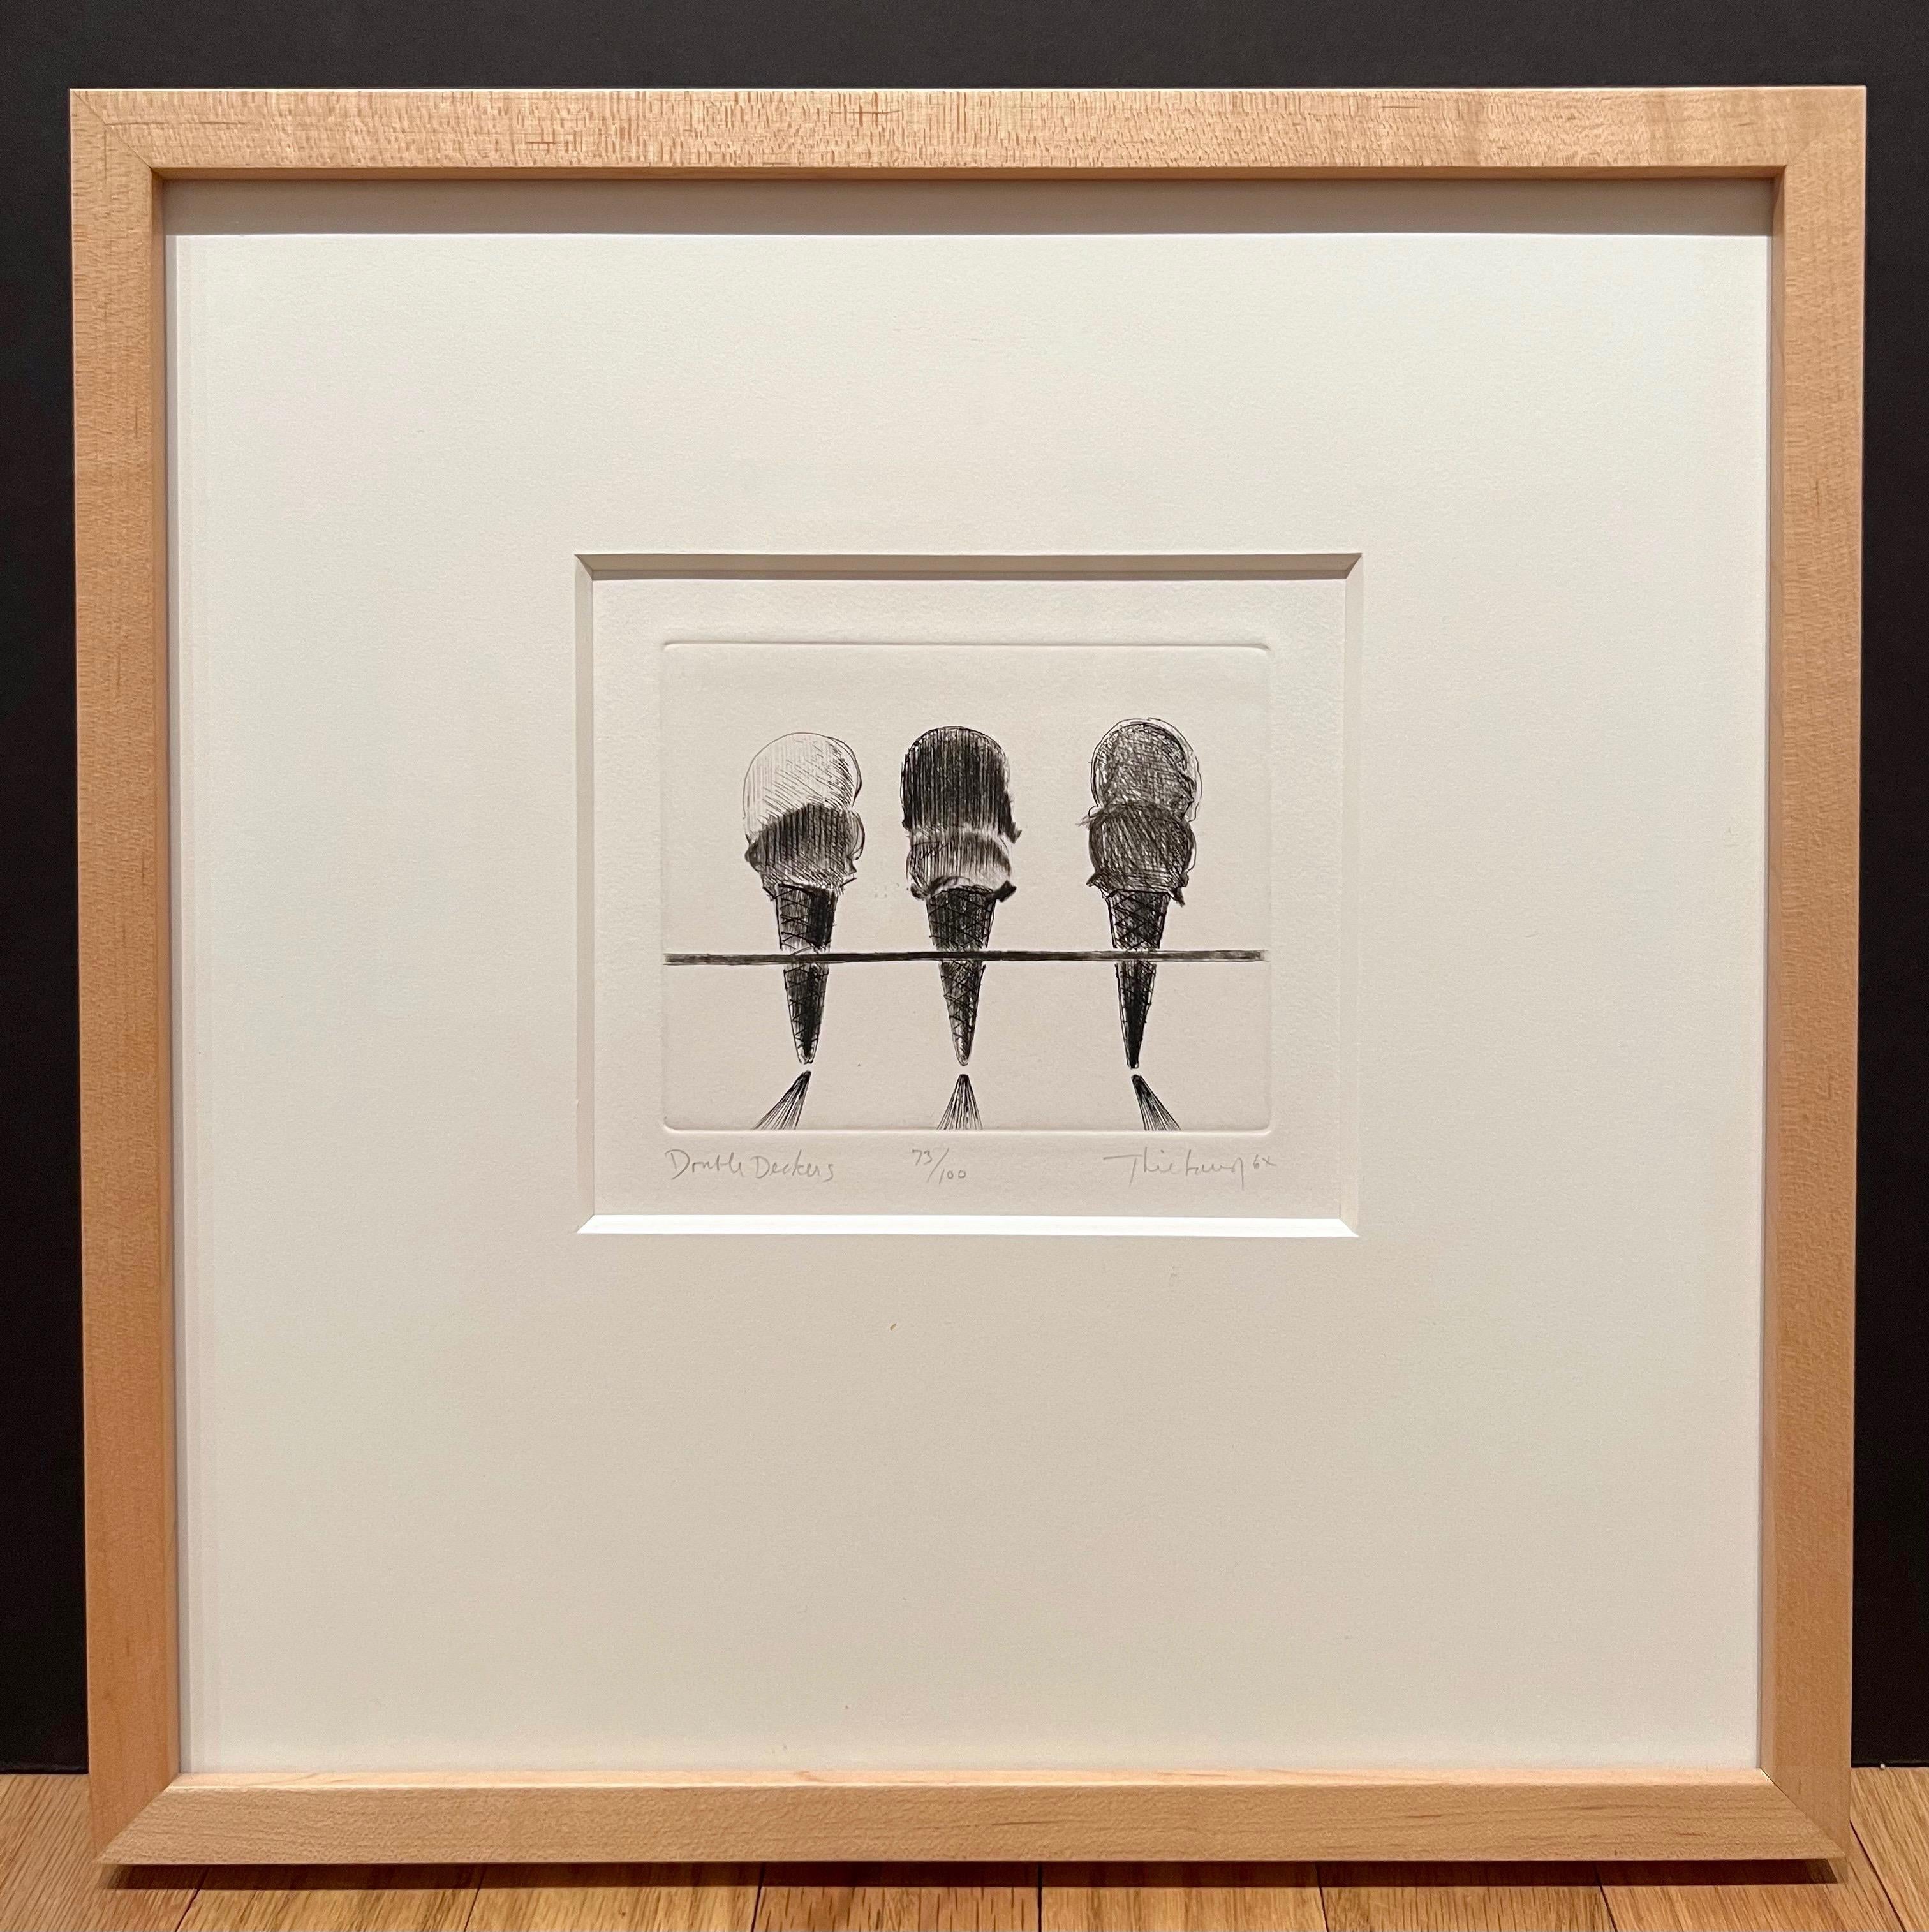 Created in 1964 as part of the Delights portfolio, Café Table (Dispensers), by Wayne Thiebaud is an original etching on BFK Rives paper.  Signed, titled and dated in pencil, the artwork is annotated “AP” (artist proof) and measures 12 7/8 x 10 ¾